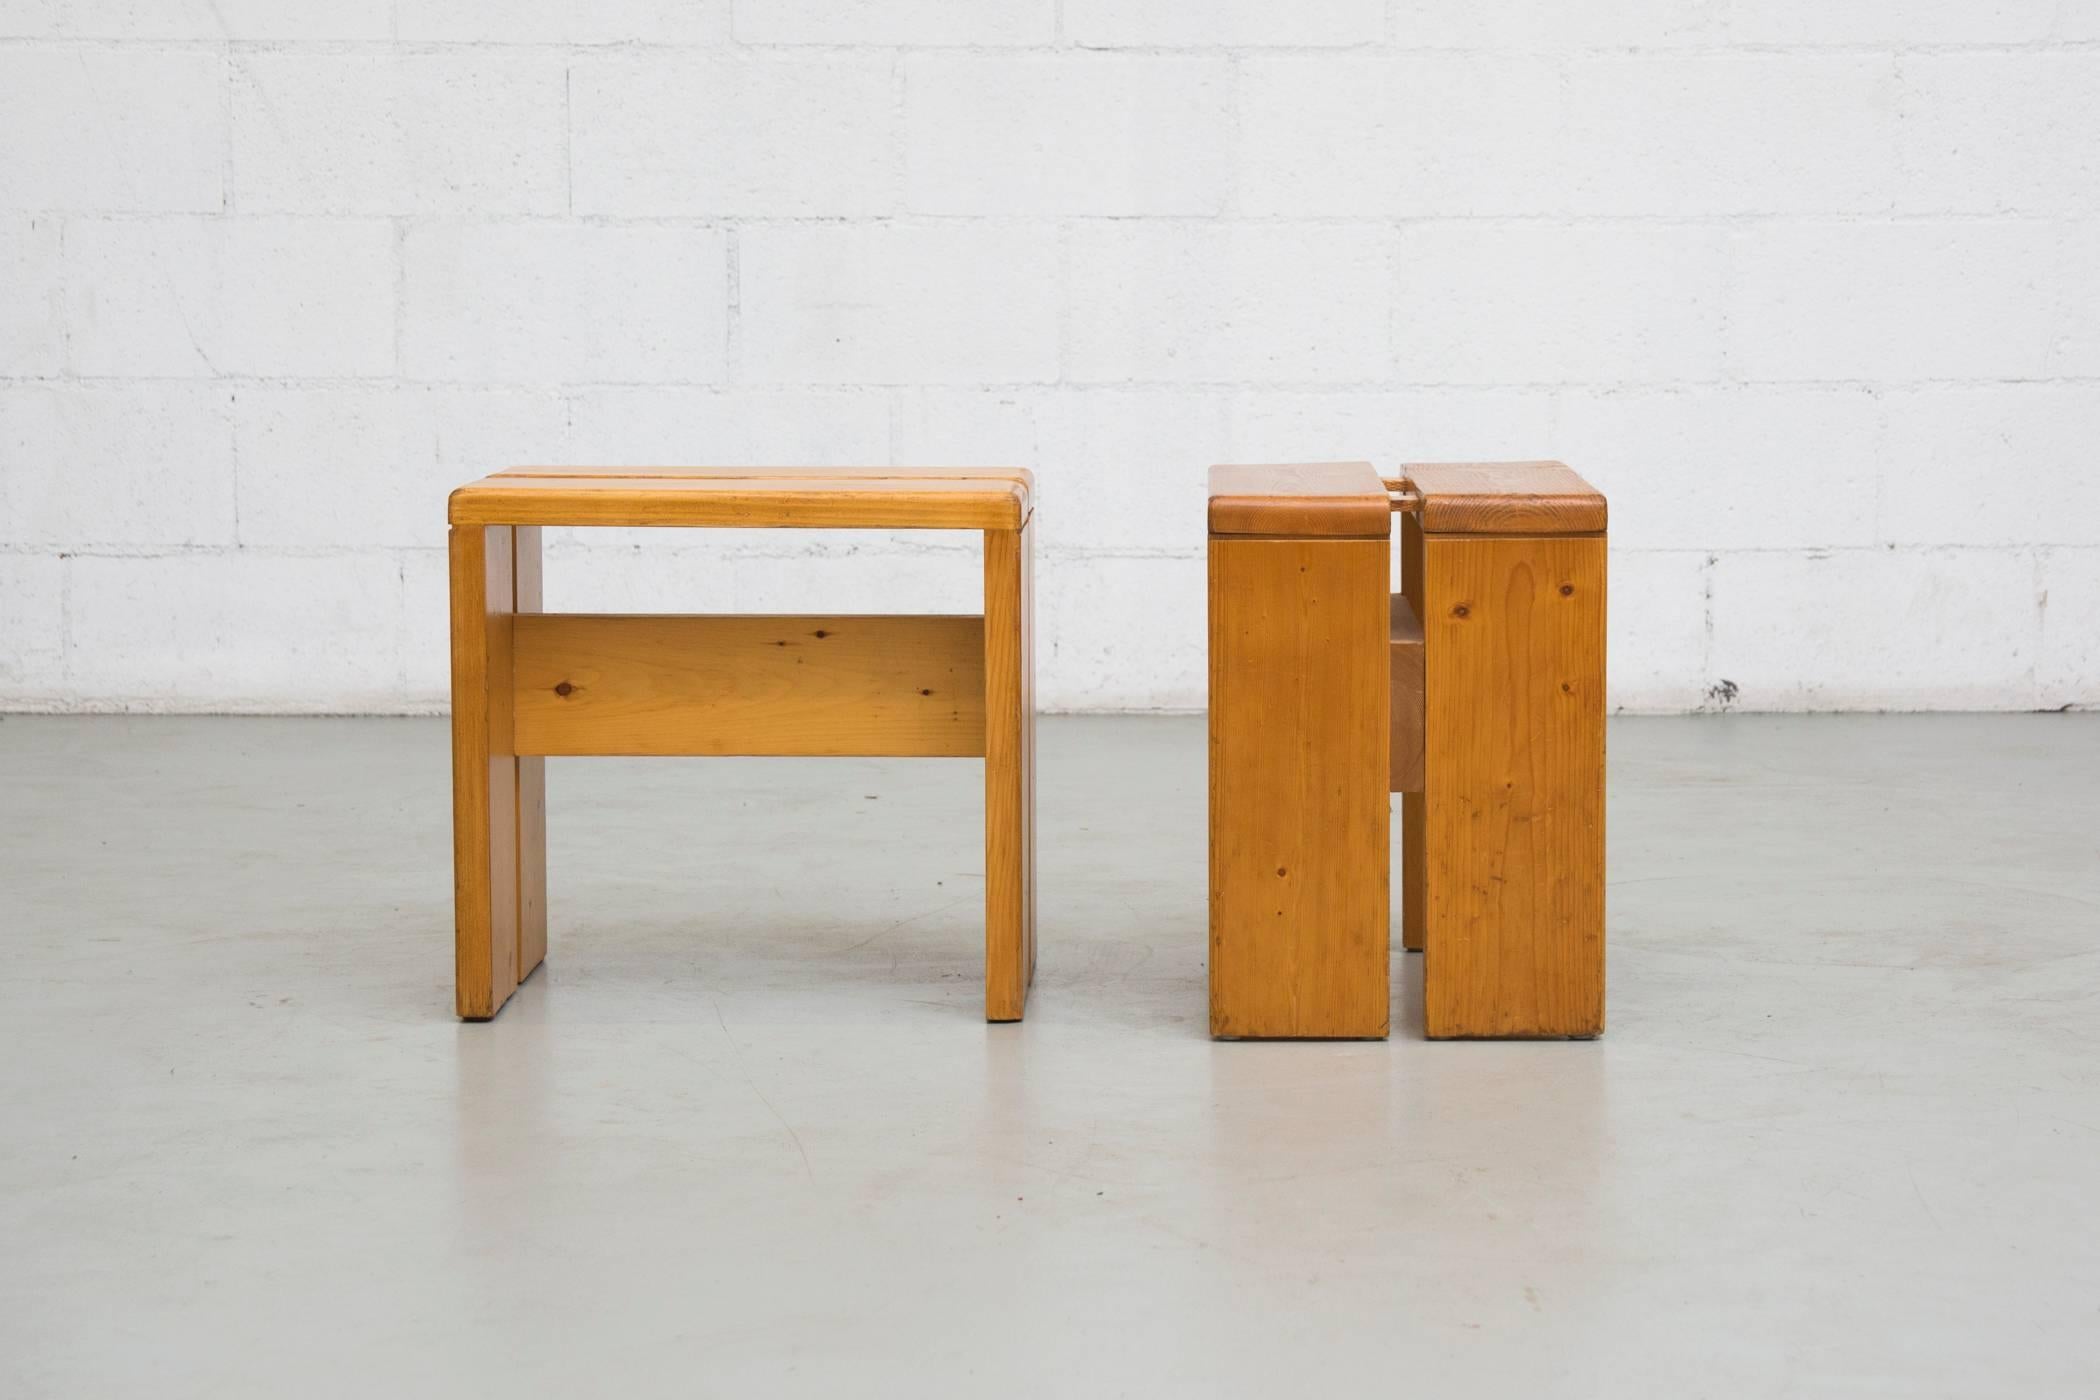 Charlotte Perriand solid pine stools from Les Arcs, France, circa 1968. In good original condition with some wear to surface consistent with age and use. Set price.